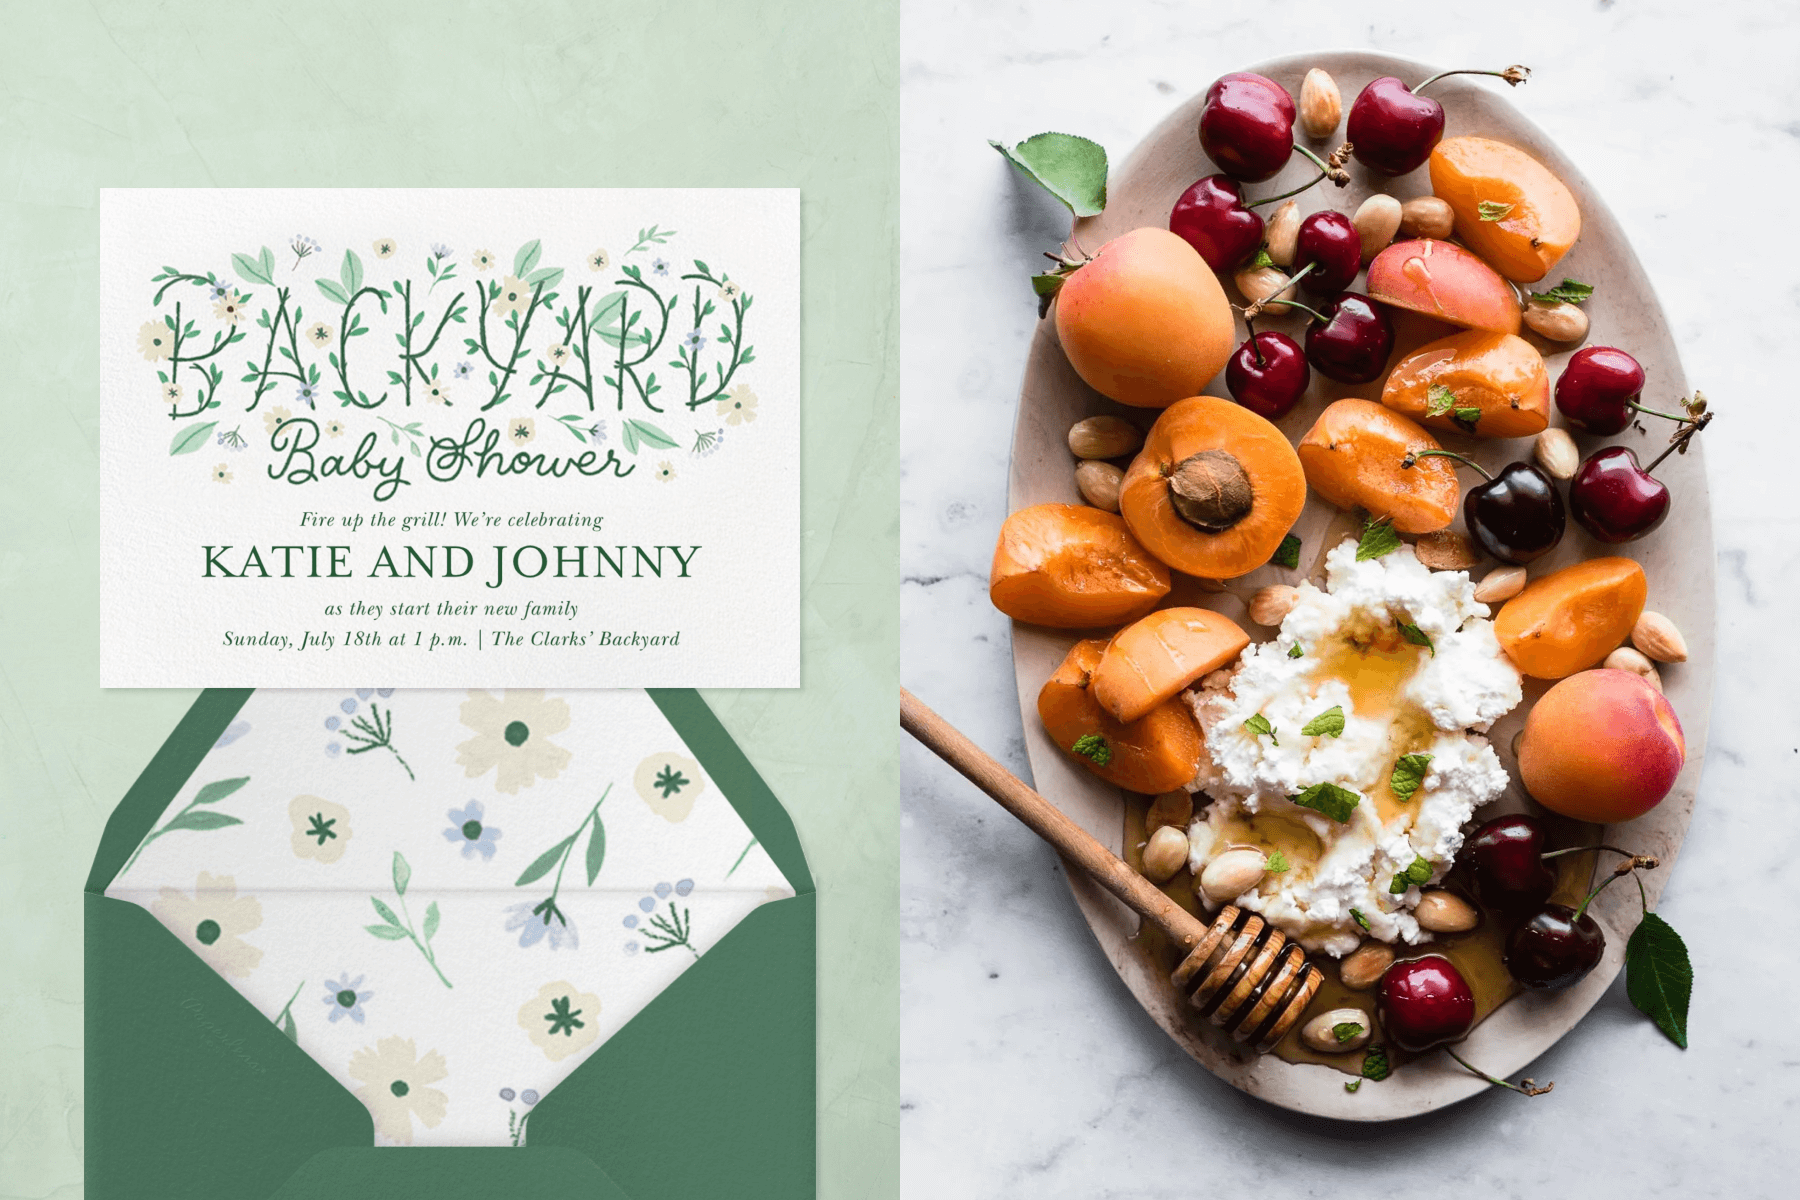 Left: A baby shower invitation with subtle leaf and flower illustrations. Right: A serving platter with stone fruits and ricotta cheese